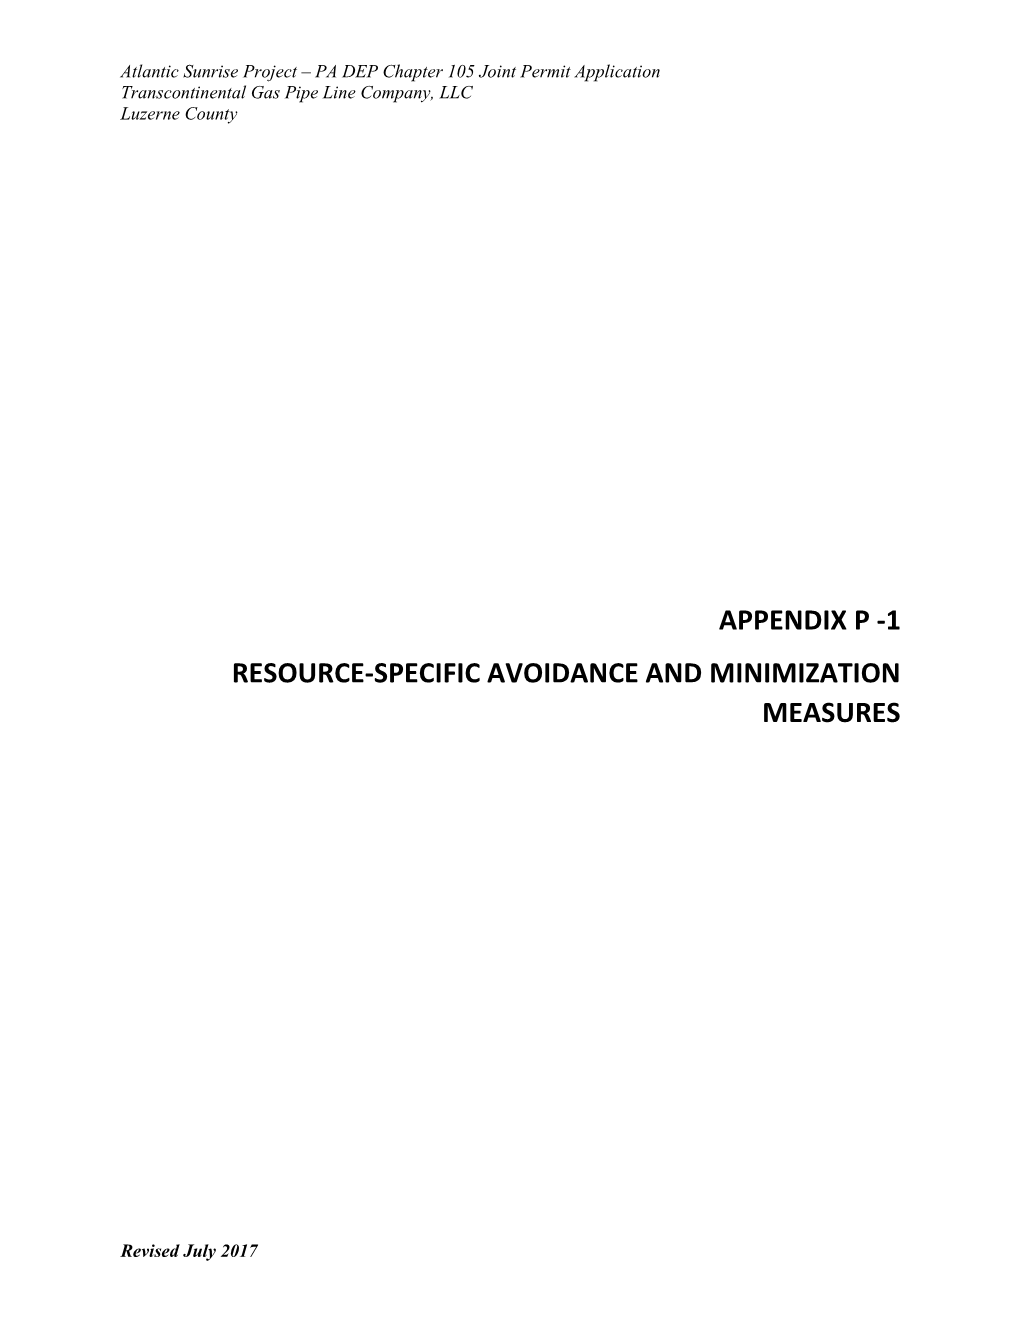 Appendix P -1 Resource-Specific Avoidance and Minimization Measures